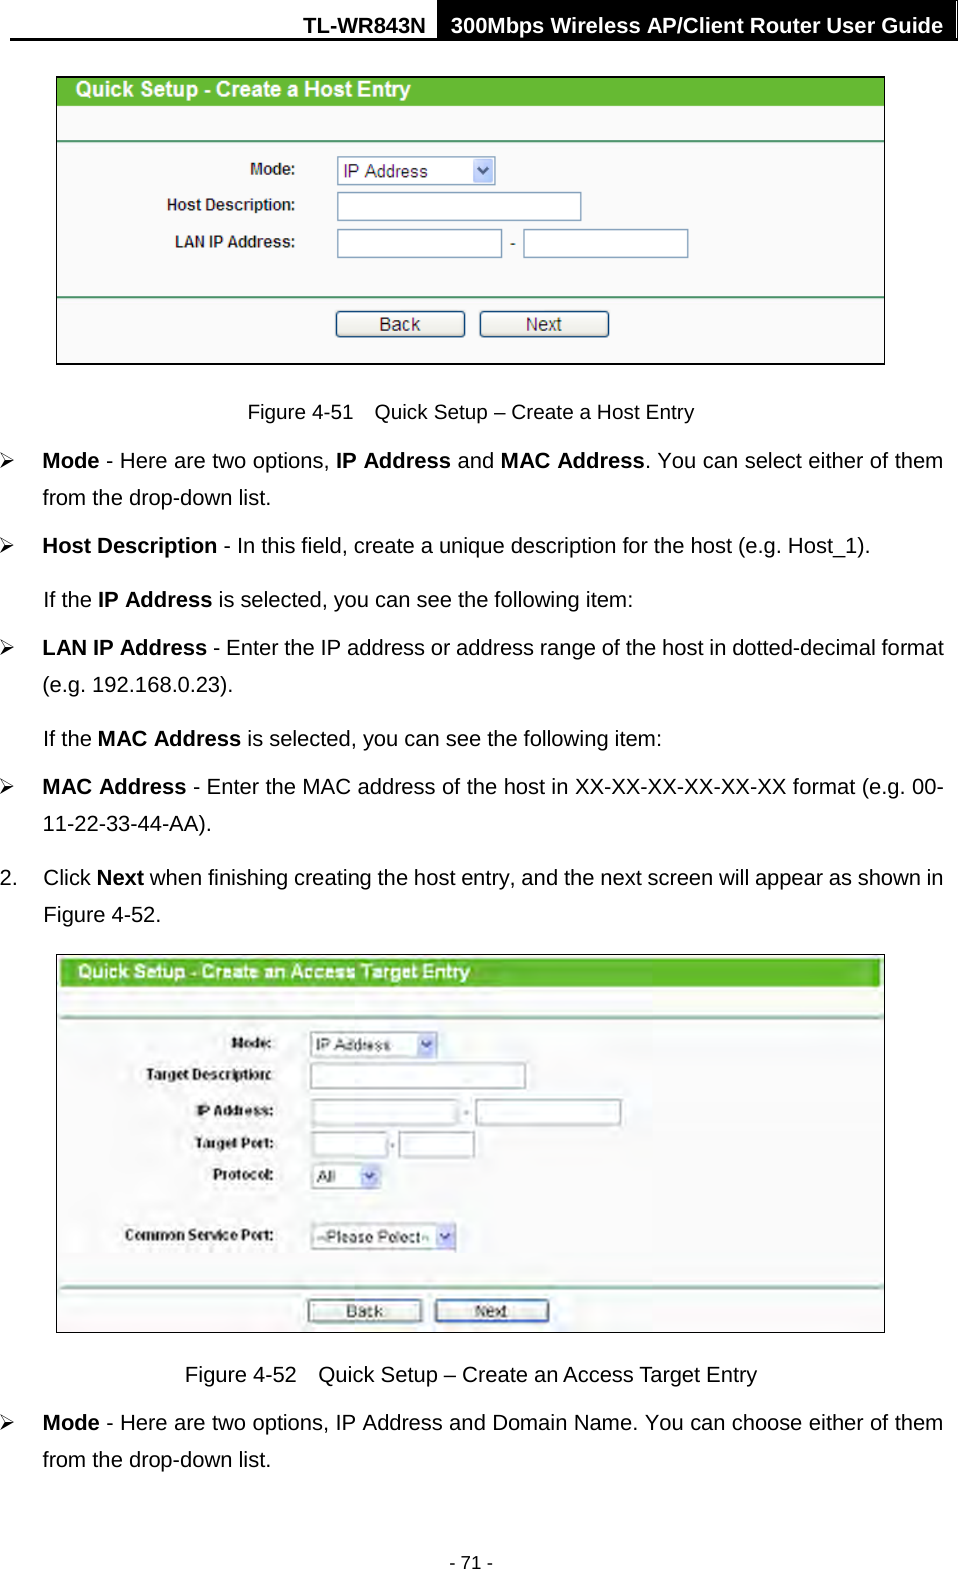 TL-WR843N 300Mbps Wireless AP/Client Router User Guide - 71 - Figure 4-51  Quick Setup – Create a Host Entry Mode - Here are two options, IP Address and MAC Address. You can select either of themfrom the drop-down list.Host Description - In this field, create a unique description for the host (e.g. Host_1).If the IP Address is selected, you can see the following item:LAN IP Address - Enter the IP address or address range of the host in dotted-decimal format(e.g. 192.168.0.23).If the MAC Address is selected, you can see the following item:MAC Address - Enter the MAC address of the host in XX-XX-XX-XX-XX-XX format (e.g. 00-11-22-33-44-AA).2. Click Next when finishing creating the host entry, and the next screen will appear as shown inFigure 4-52.Figure 4-52  Quick Setup – Create an Access Target Entry Mode - Here are two options, IP Address and Domain Name. You can choose either of themfrom the drop-down list.